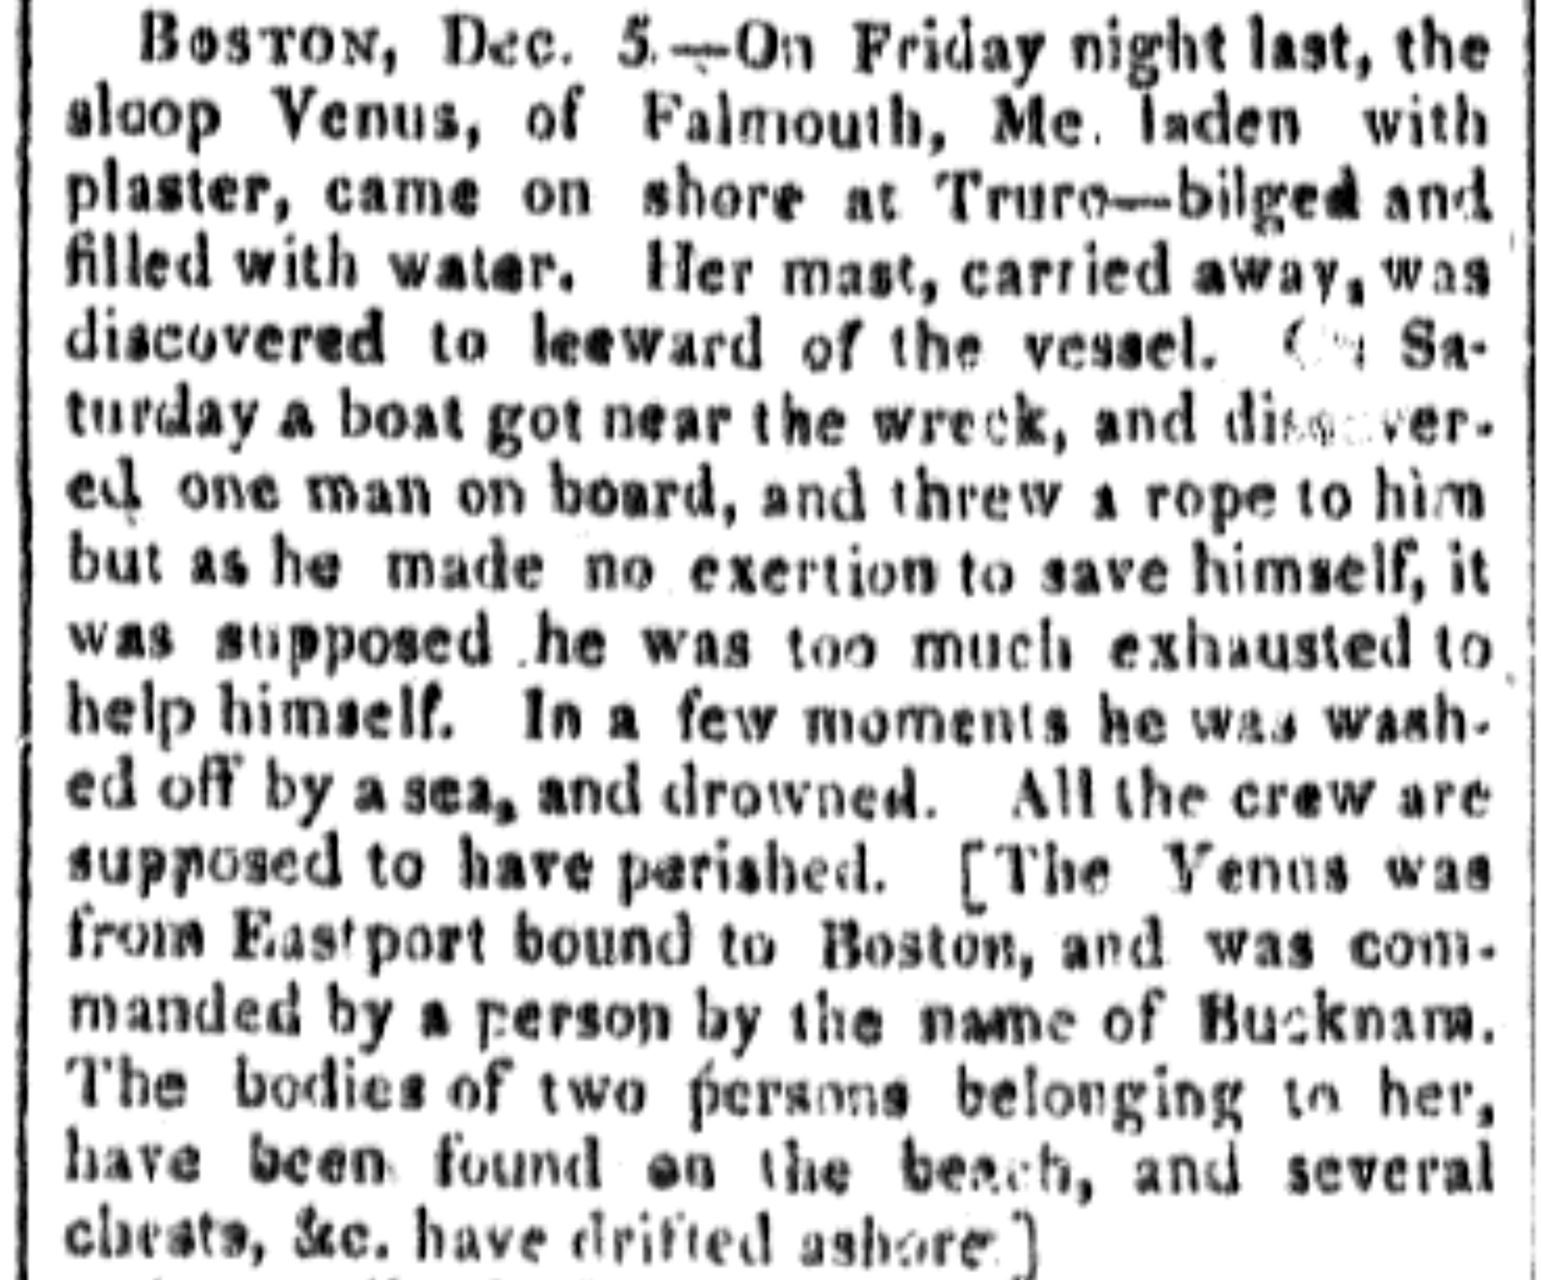 Newspaper item about shipwreck of Falmouth sloop